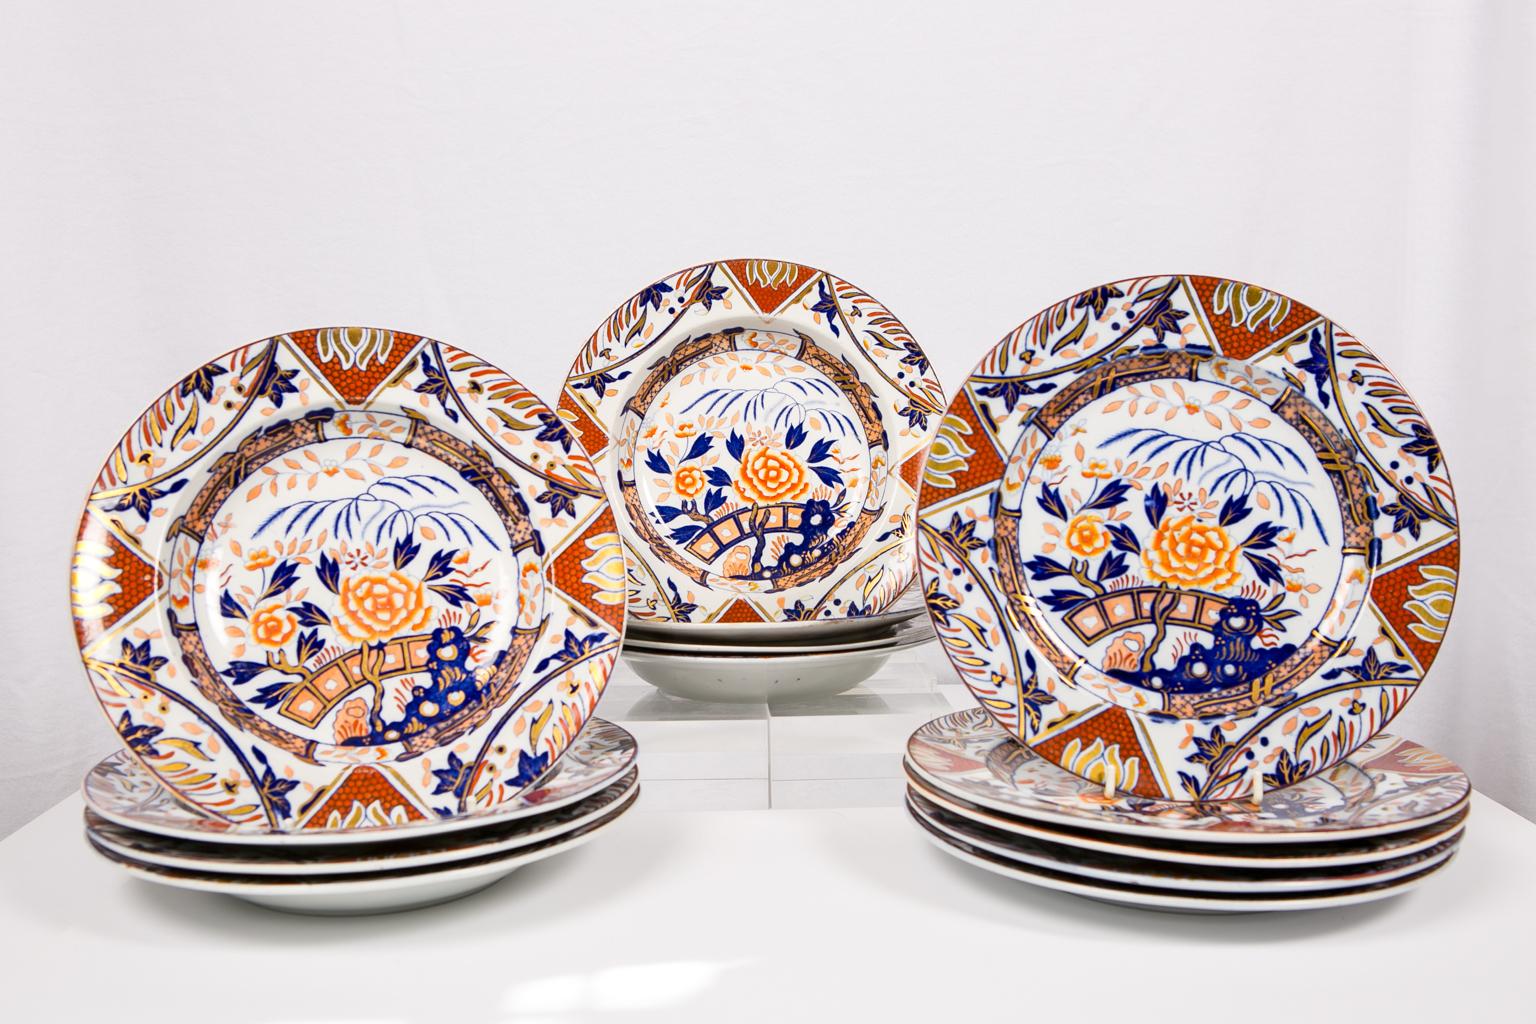 We are pleased to offer this extensive set of English Imari dishes painted in iron red, deep blue, and gold showing a garden scene. Each dish is fully decorated in a pattern with large peonies and a flowering tree issuing from blue Taihu rocks. The